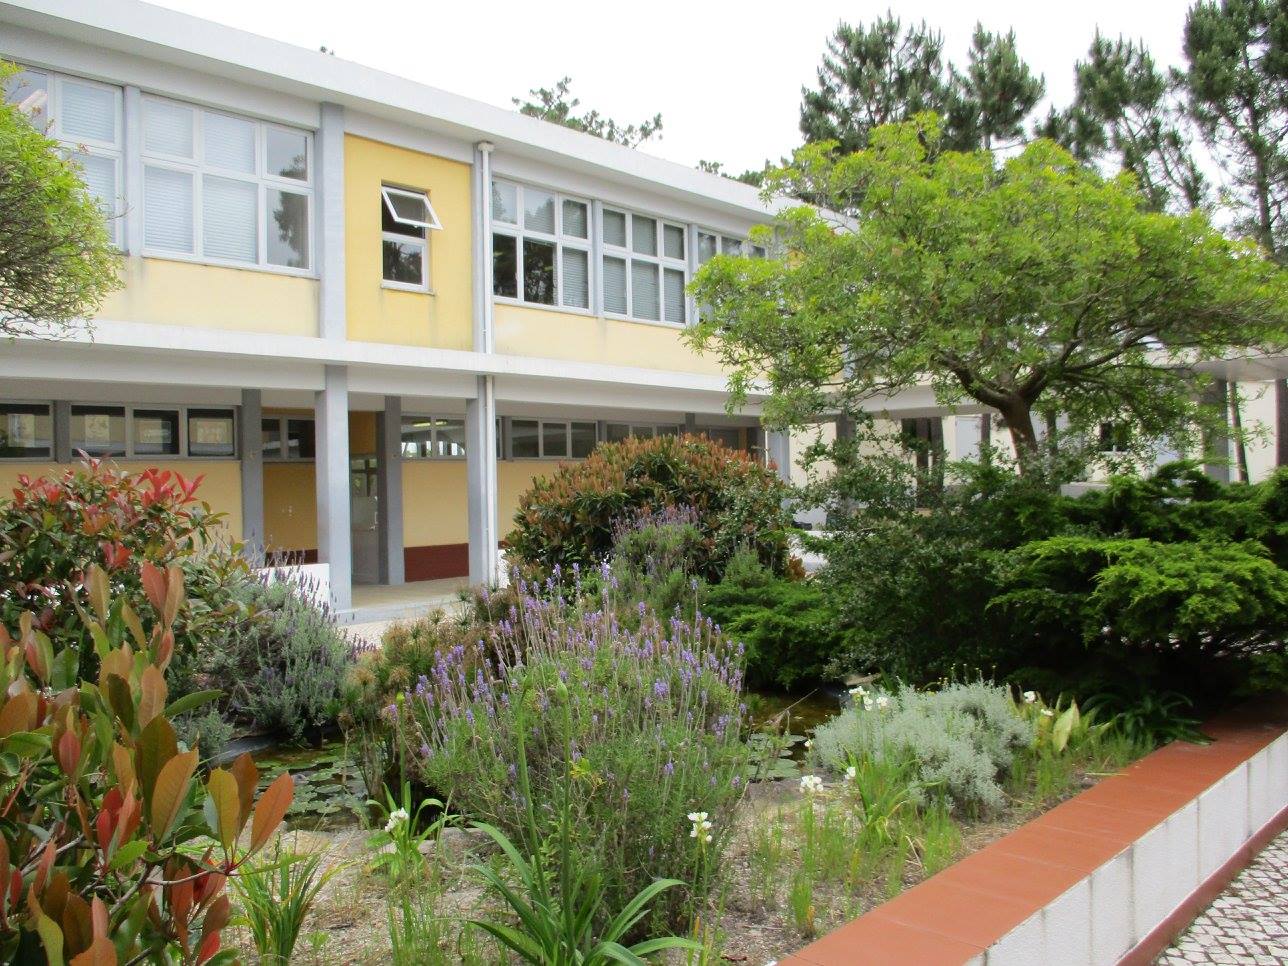 Motivating Students: a ClassPoint School Case Study with Escola Profissional de Penafirme in Torres Vedras, Portugal